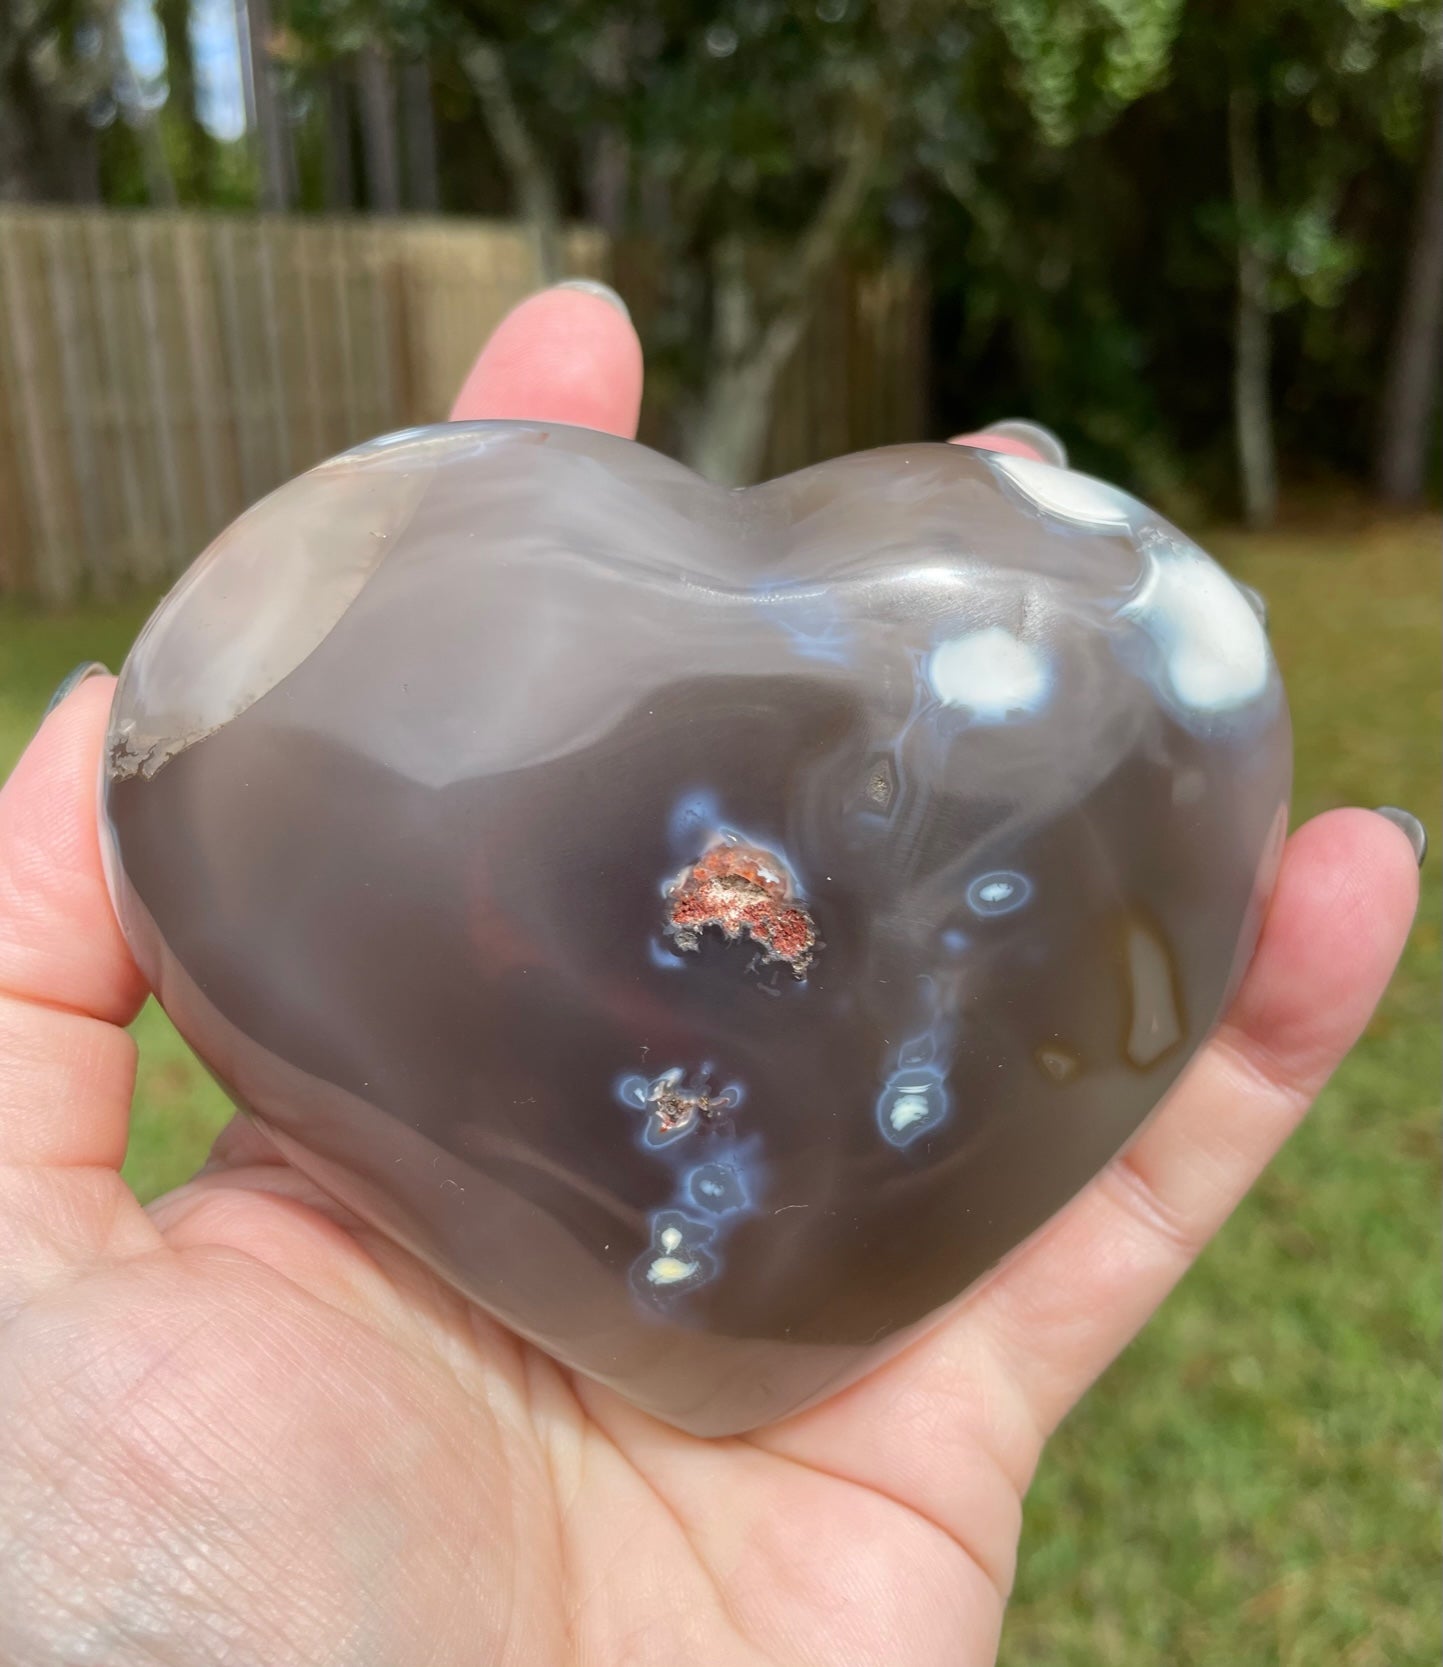 Large Orca Agate Heart Crystal Carving 1 pound 2 oz